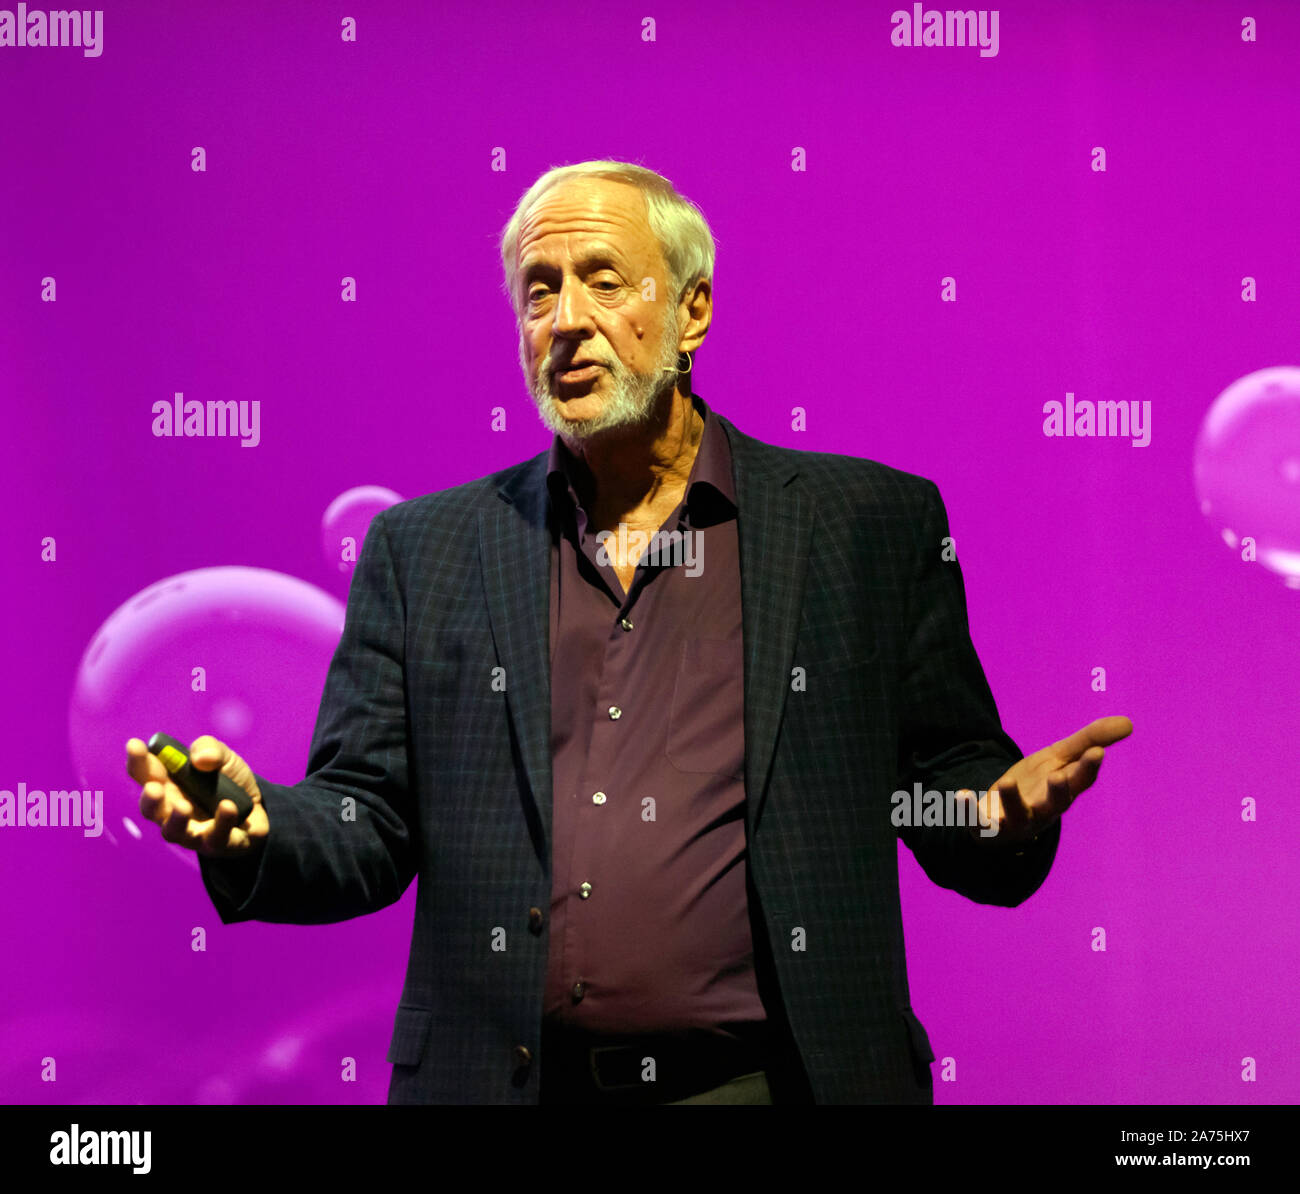 Robert Plomin, Geneticist at King's College London, giving a talk entitled "Predicting school performance from DNA ", on the Humans Stage, at New Scientist Live 2019 Stock Photo